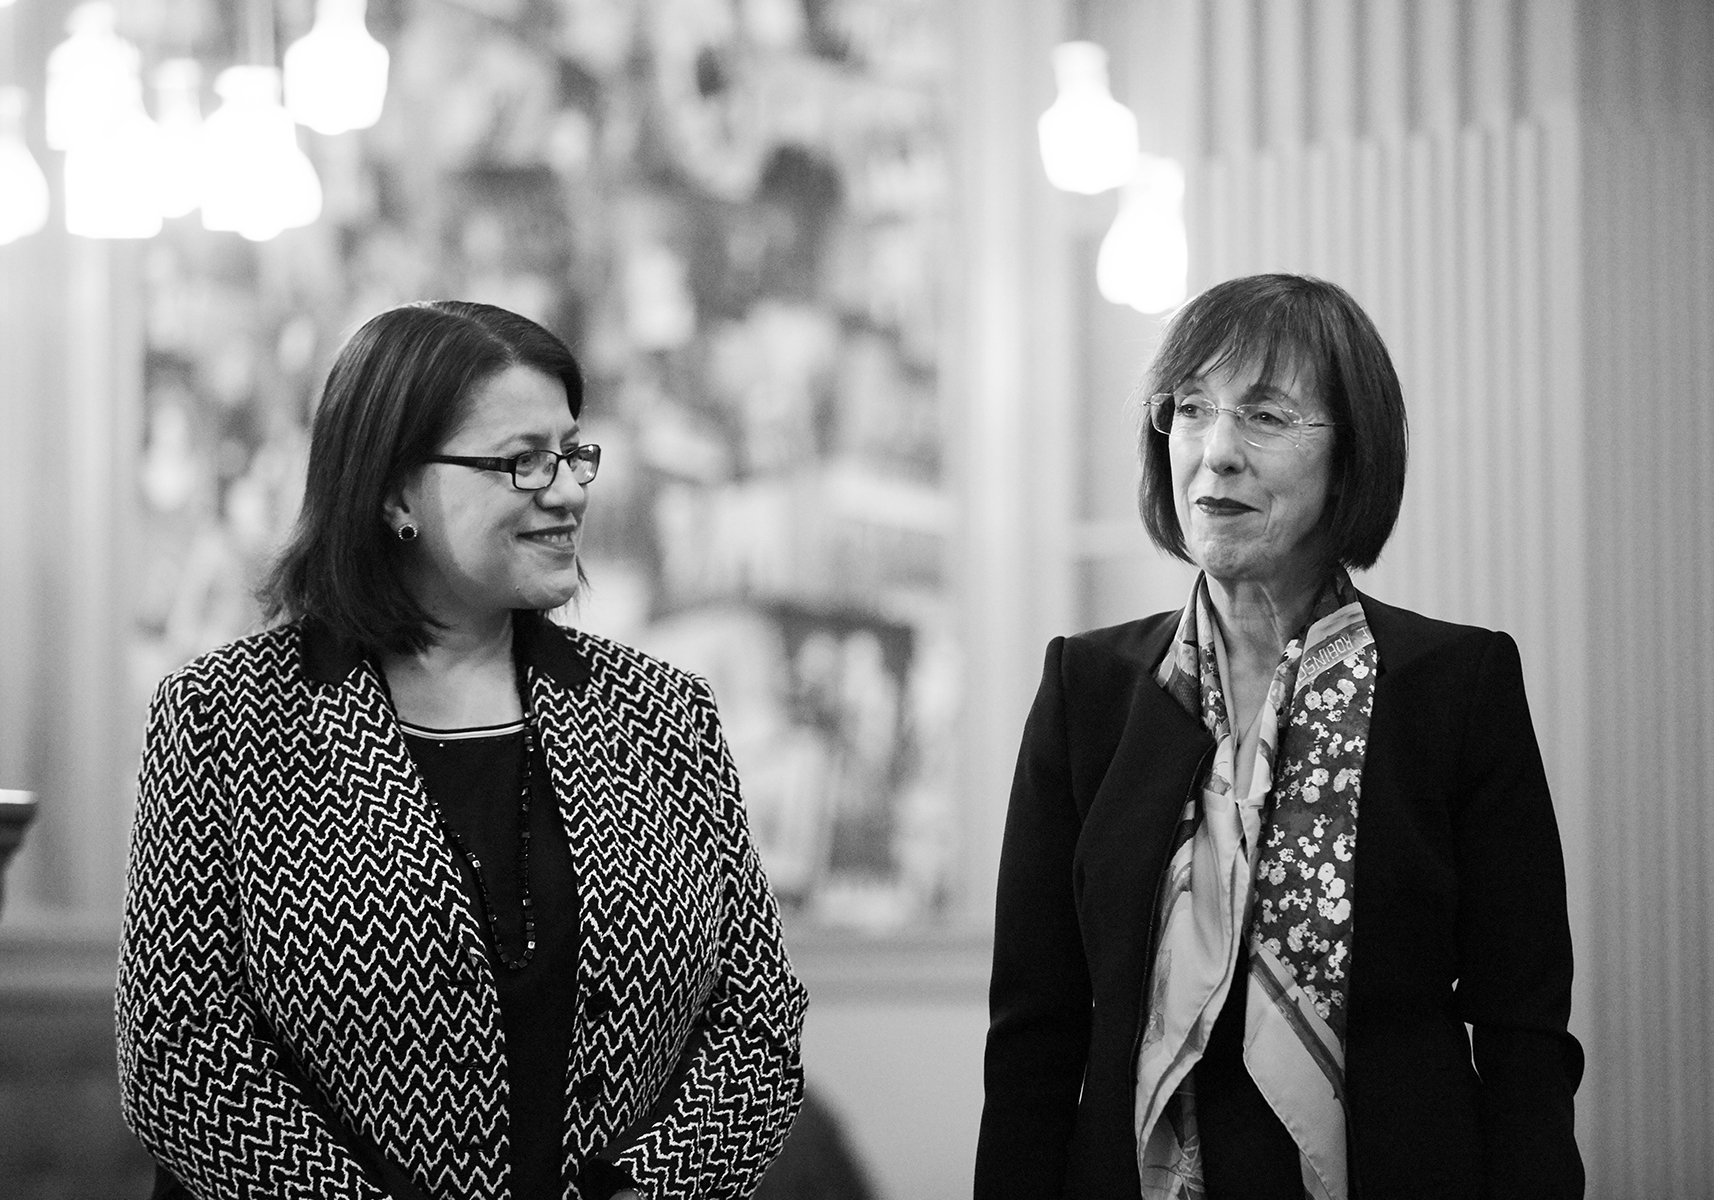 The Honourable Jenny Mikakos, Minister for Families and Children and Minister for Youth Affairs & The Honourable Chief Justice Warren AC